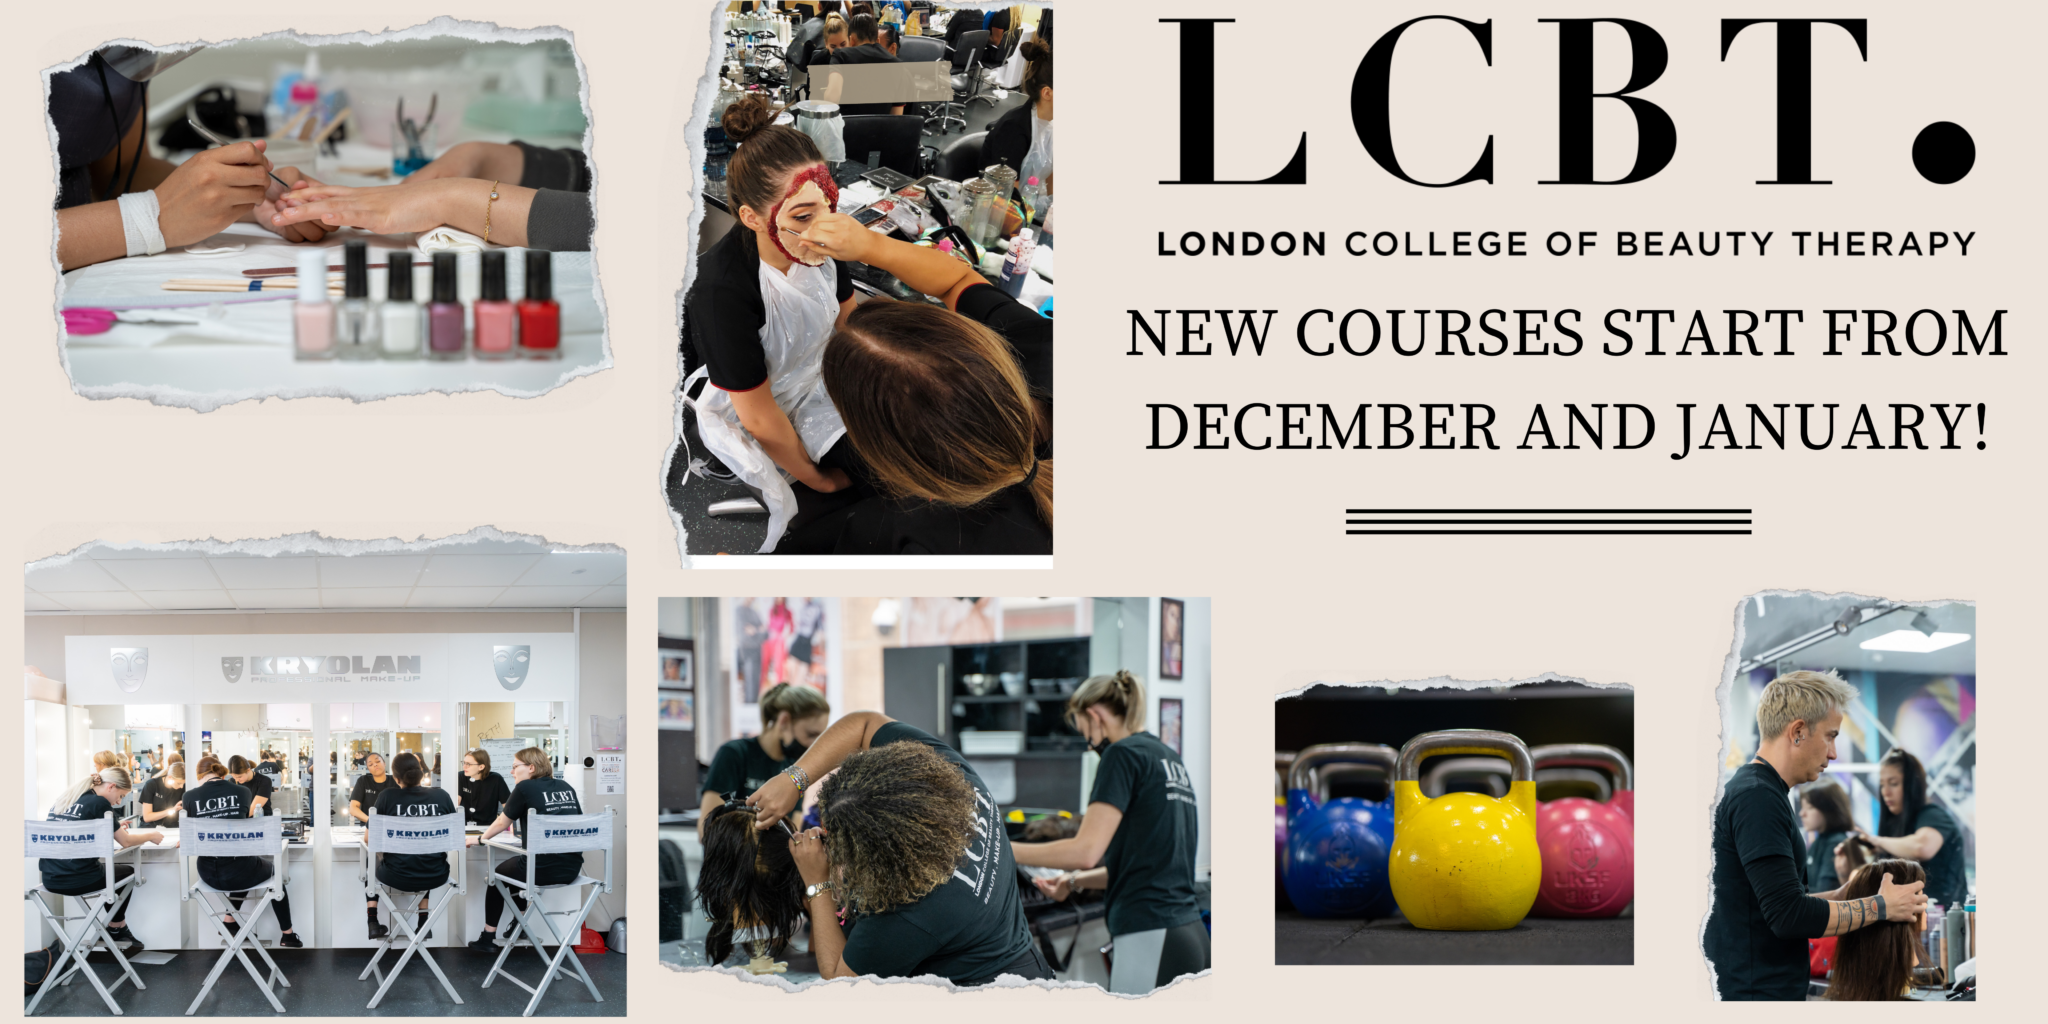 London College of Beauty Therapy - wide 3